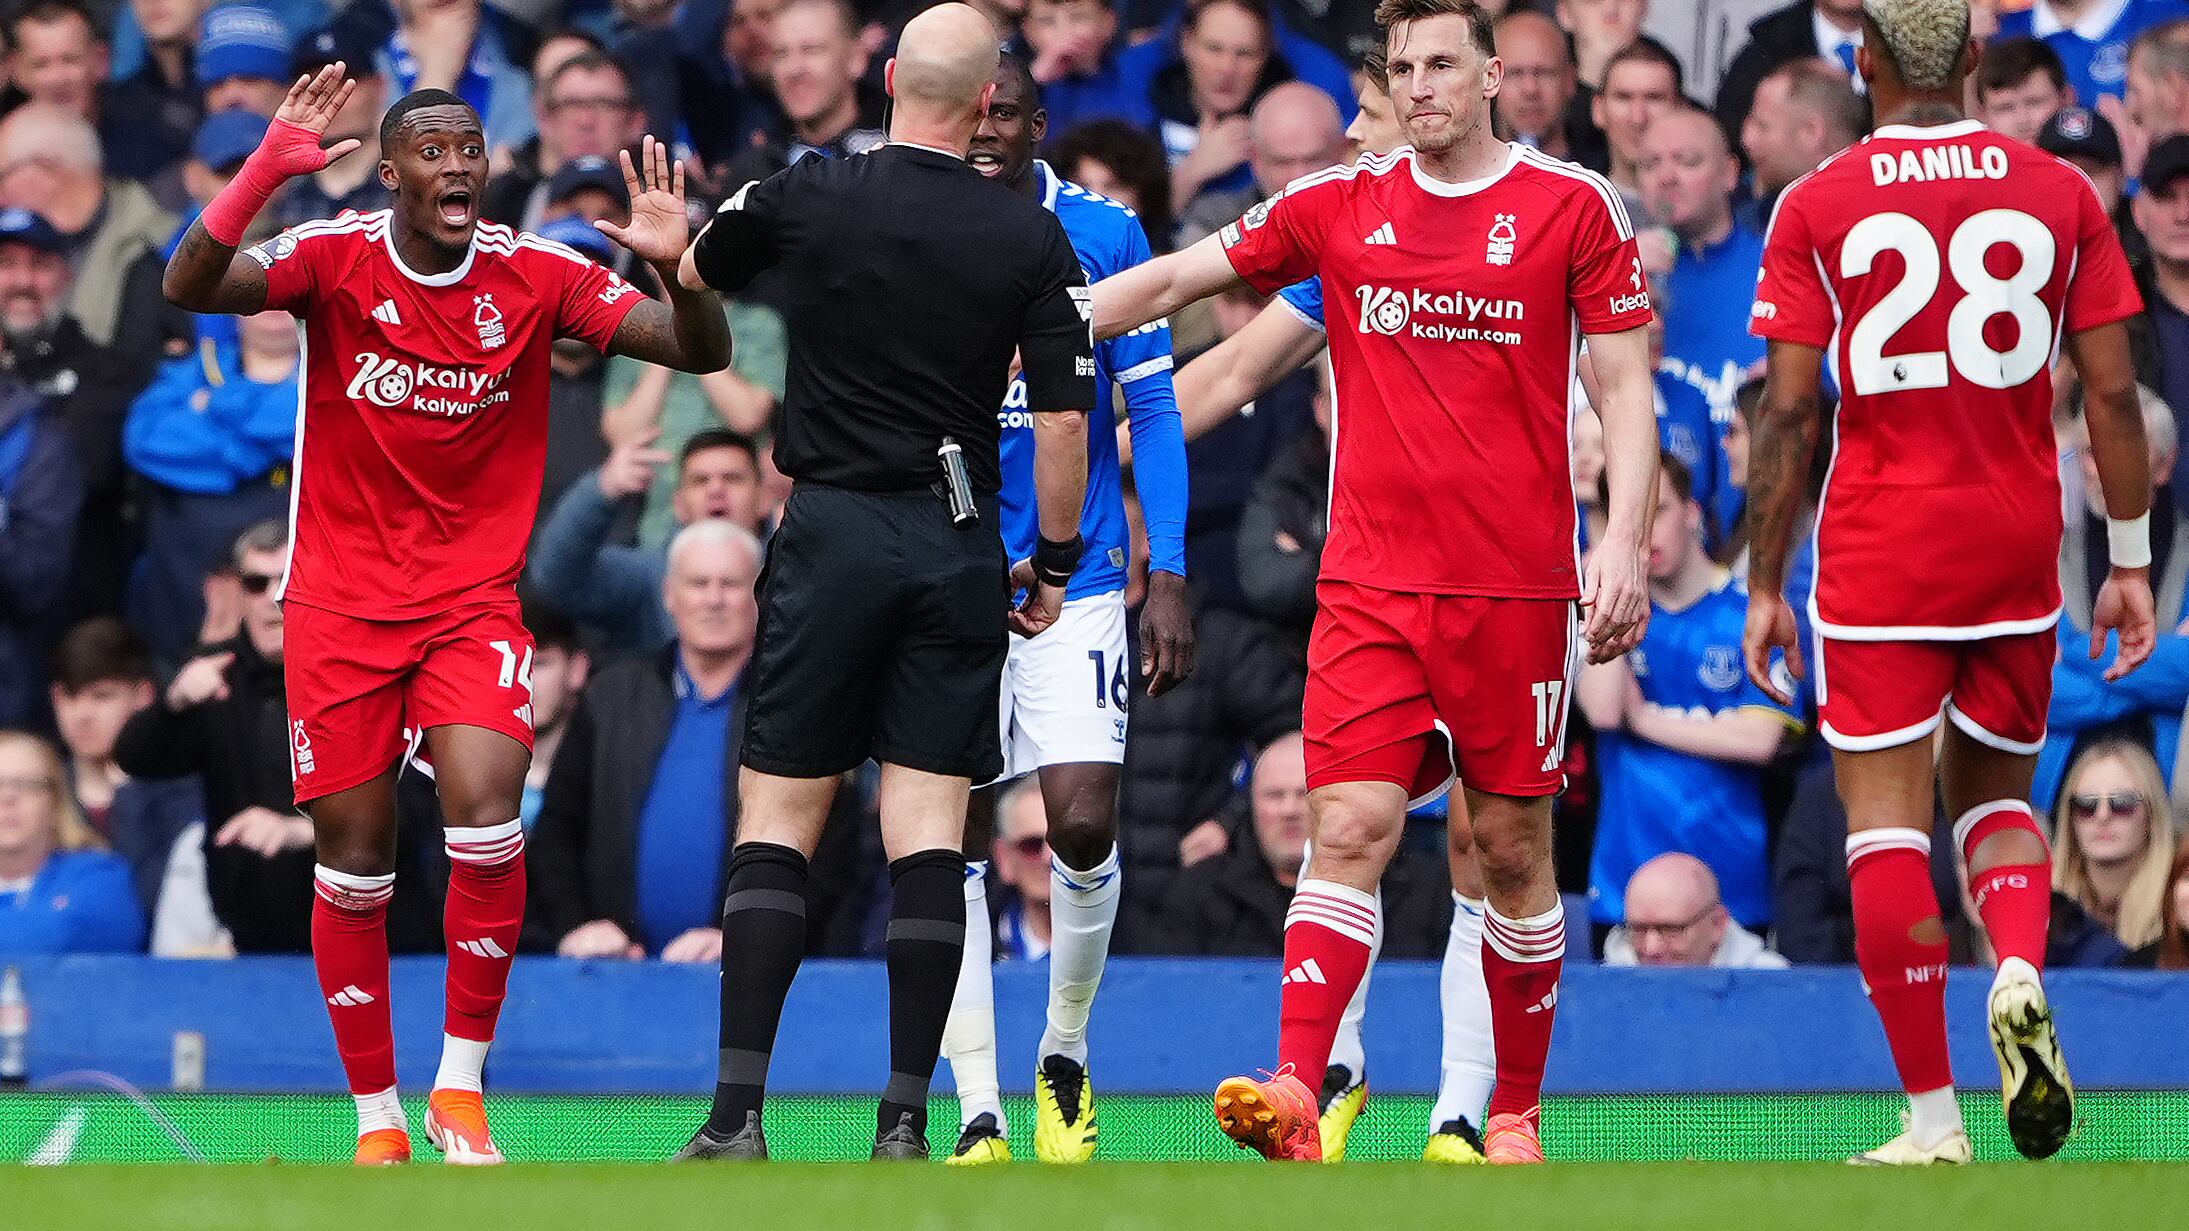 Nottingham Forest were not happy at Goodison Park